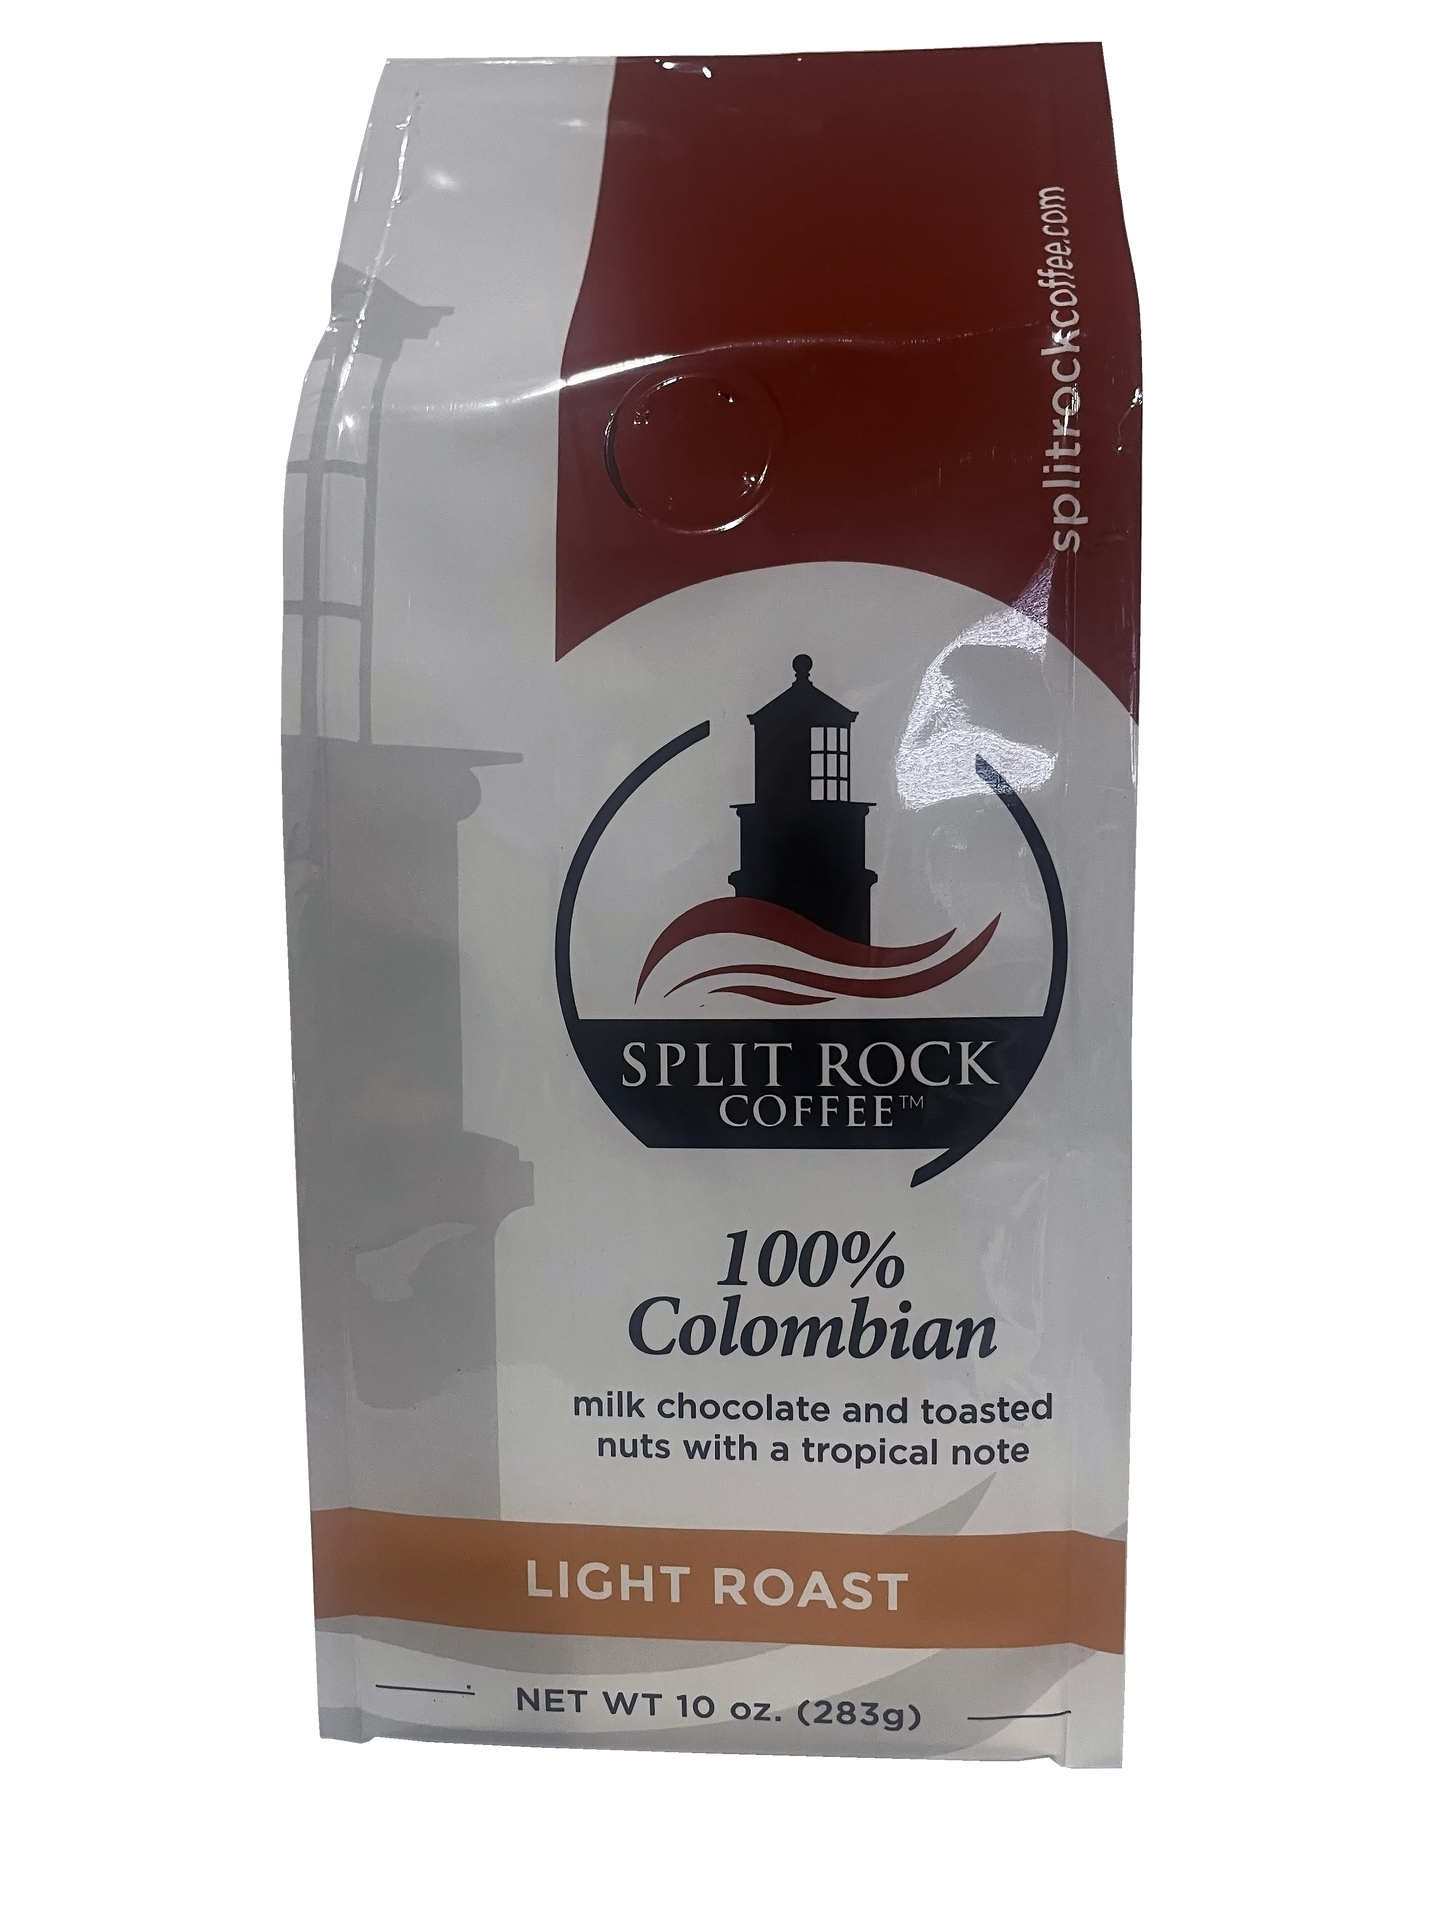 HUGE SALE!!! Buy 6 light roast and save $29.94 WITH FREE SHIPPING